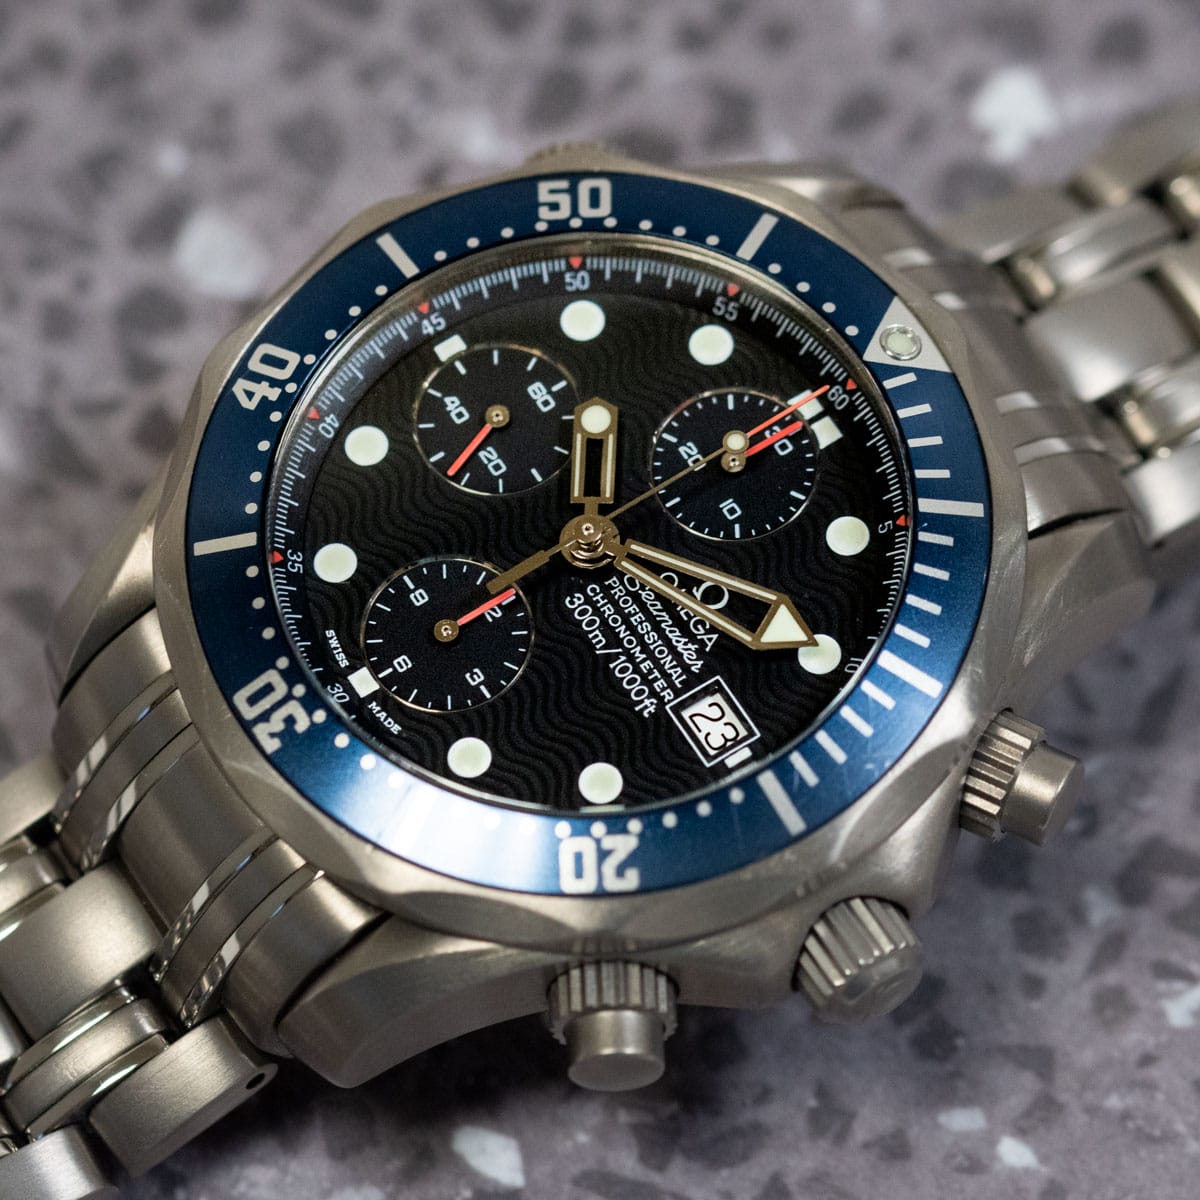 Stylied photo of  of Seamaster Professional Chronograph